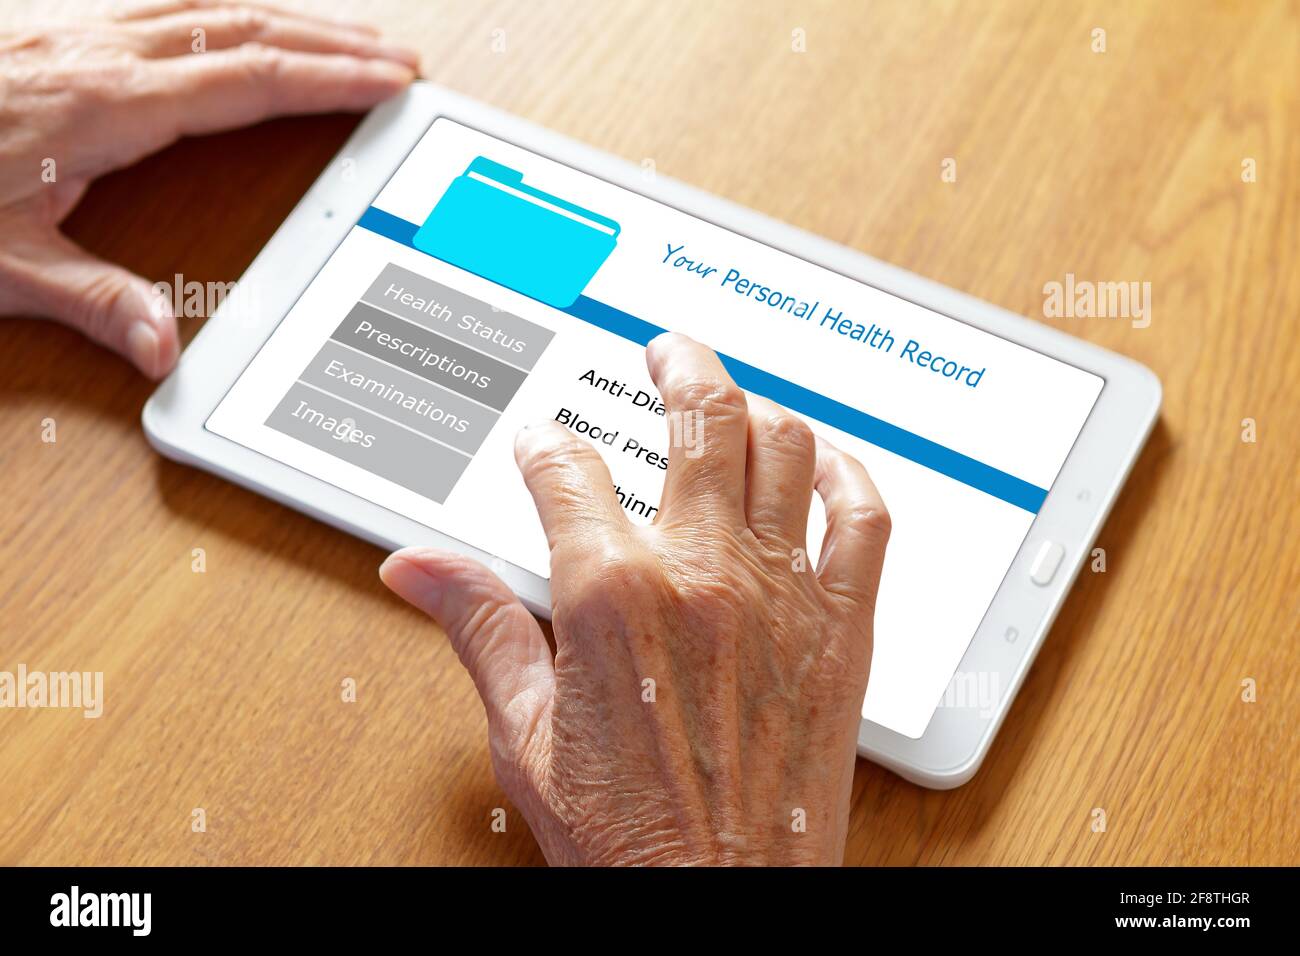 Mobile health concept: personal patient record on a tablet computer, hands of an old woman touching the screen. Stock Photo